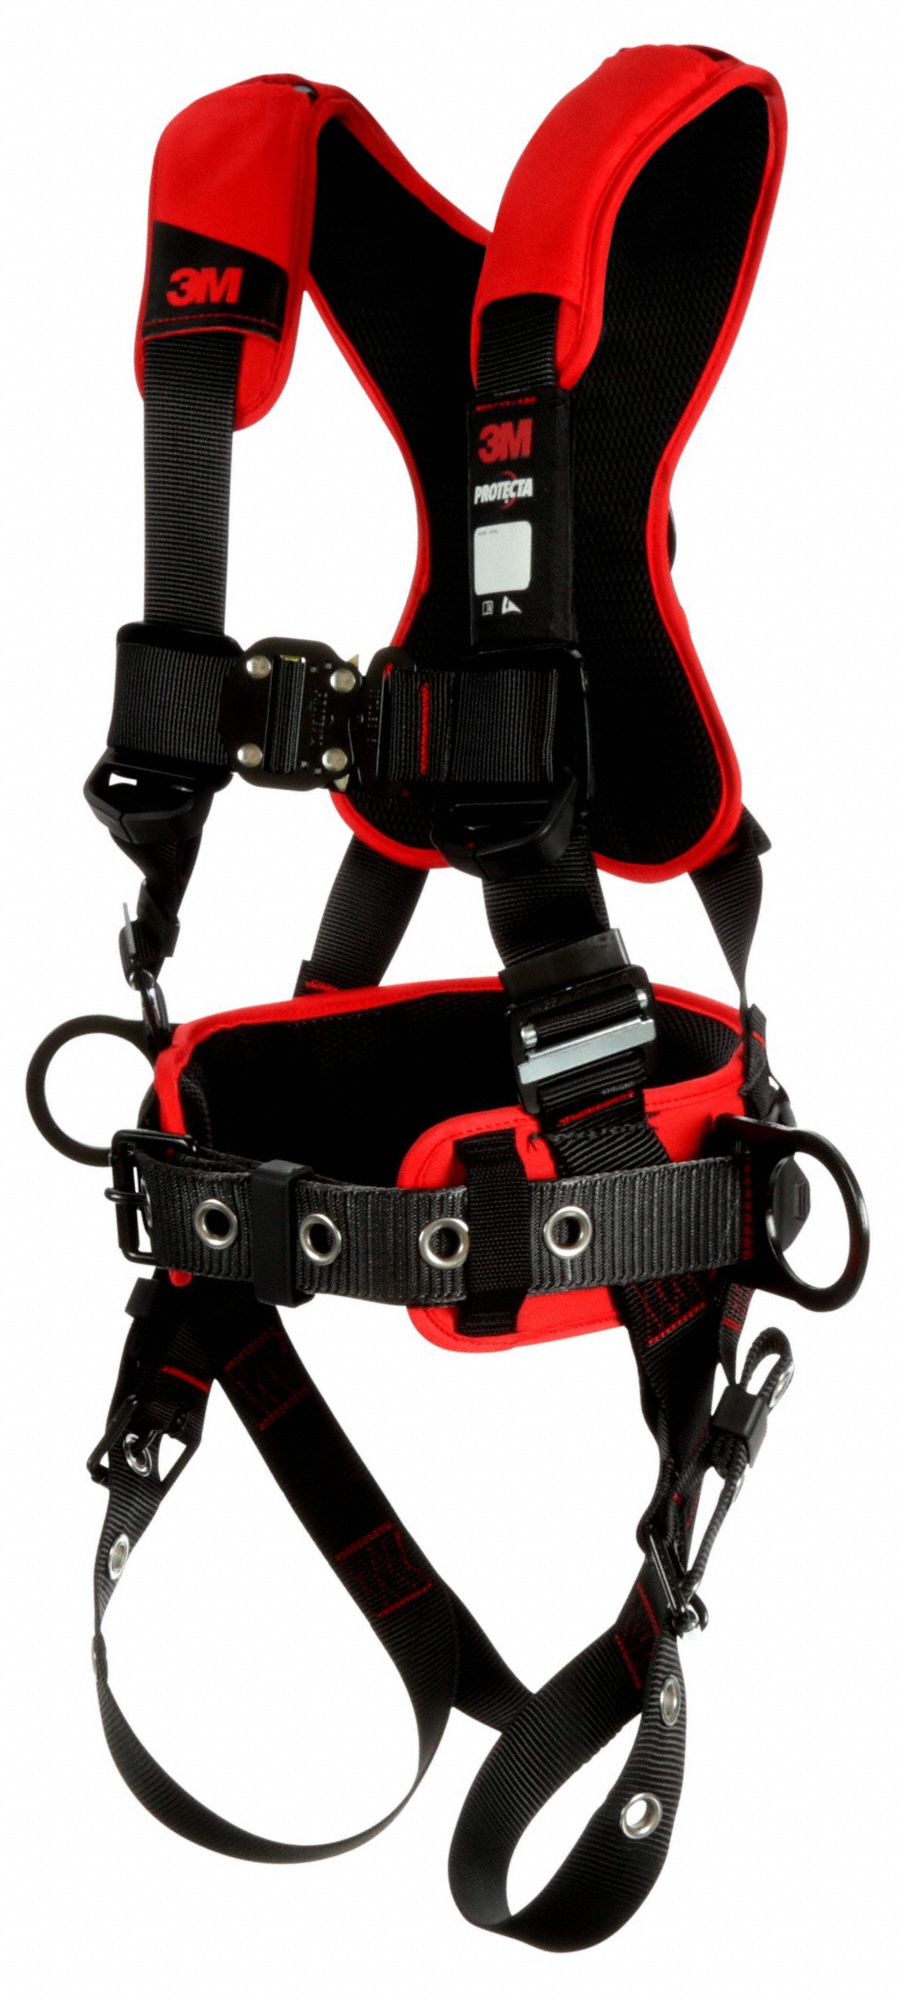 3M PROTECTA Full Body Harness: Positioning, Vest Harness, Back/Hips ...